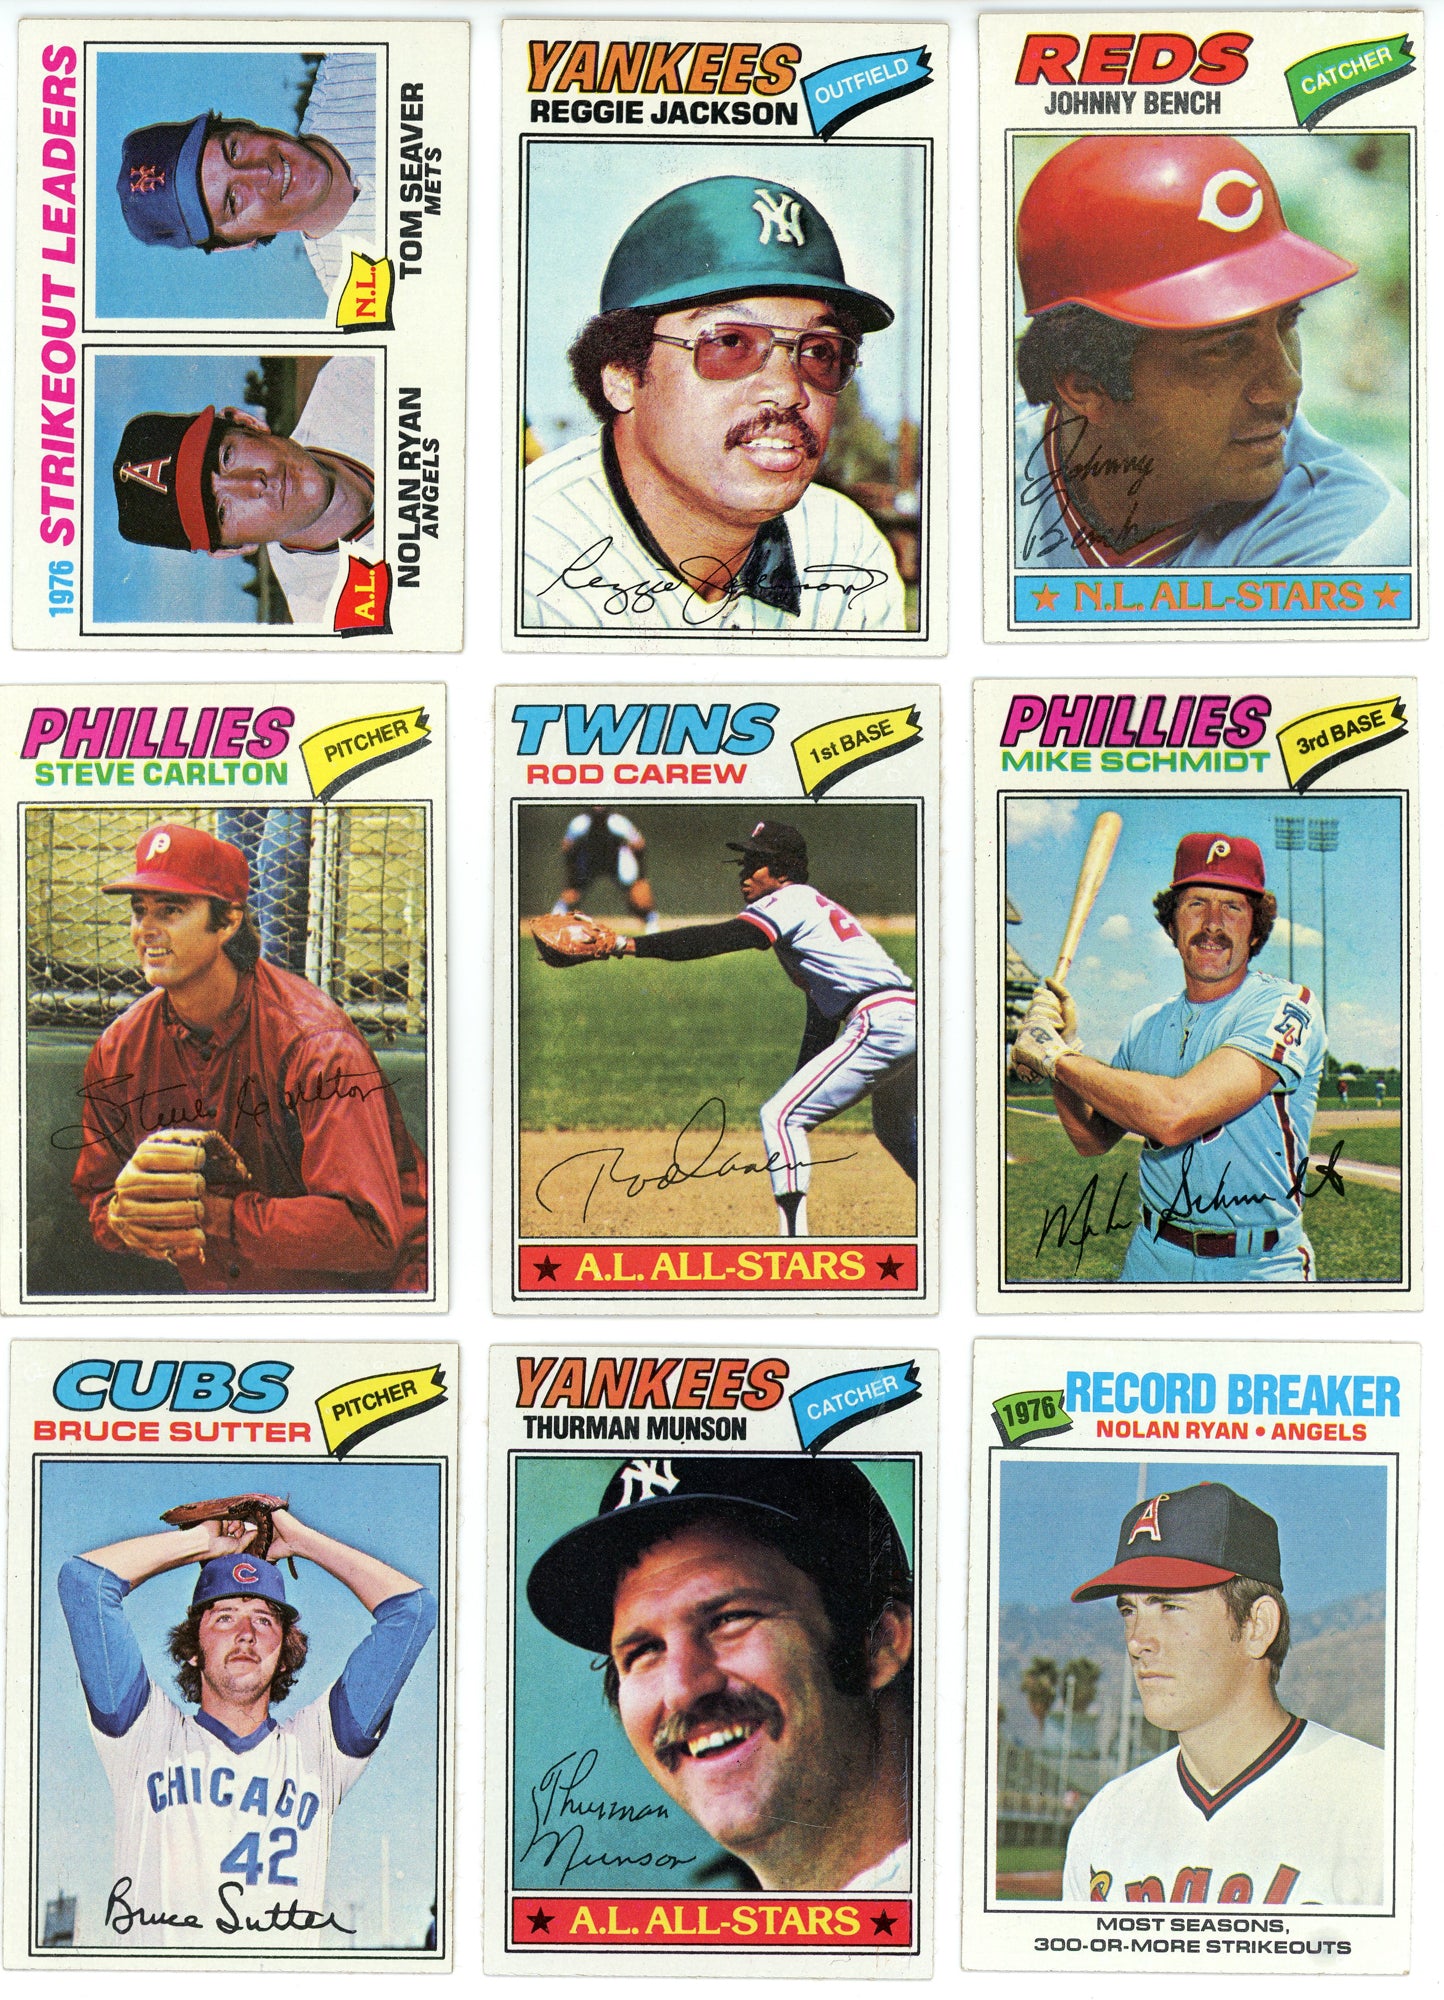 15 Most Valuable 1976 Topps Baseball Cards - Old Sports Cards